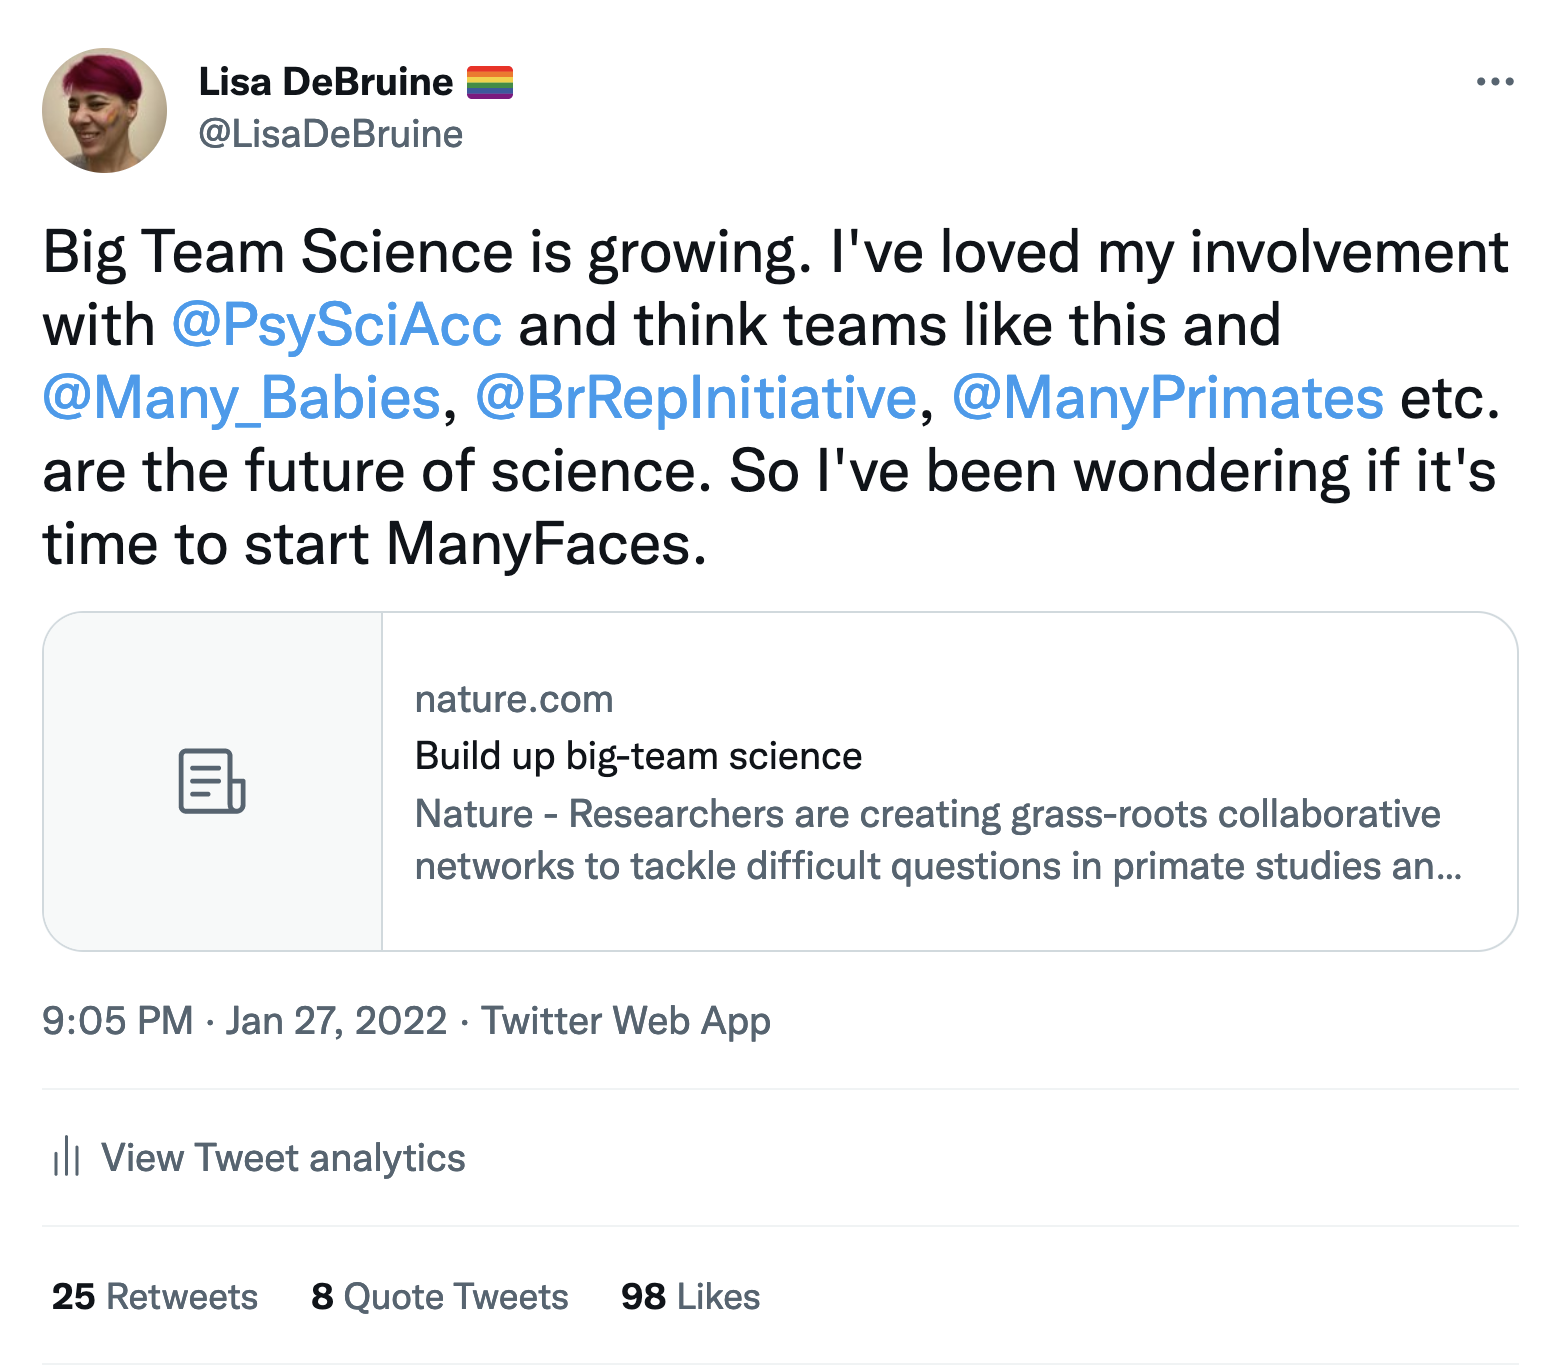 Tweet from Lisa DeBruine: Big Team Science is growing. I've loved my involvement with @PsySciAcc and think teams like this and @Many_Babies, @BrRepInitiative, @ManyPrimates etc. are the future of science. So I've been wondering if it's time to start ManyFaces.